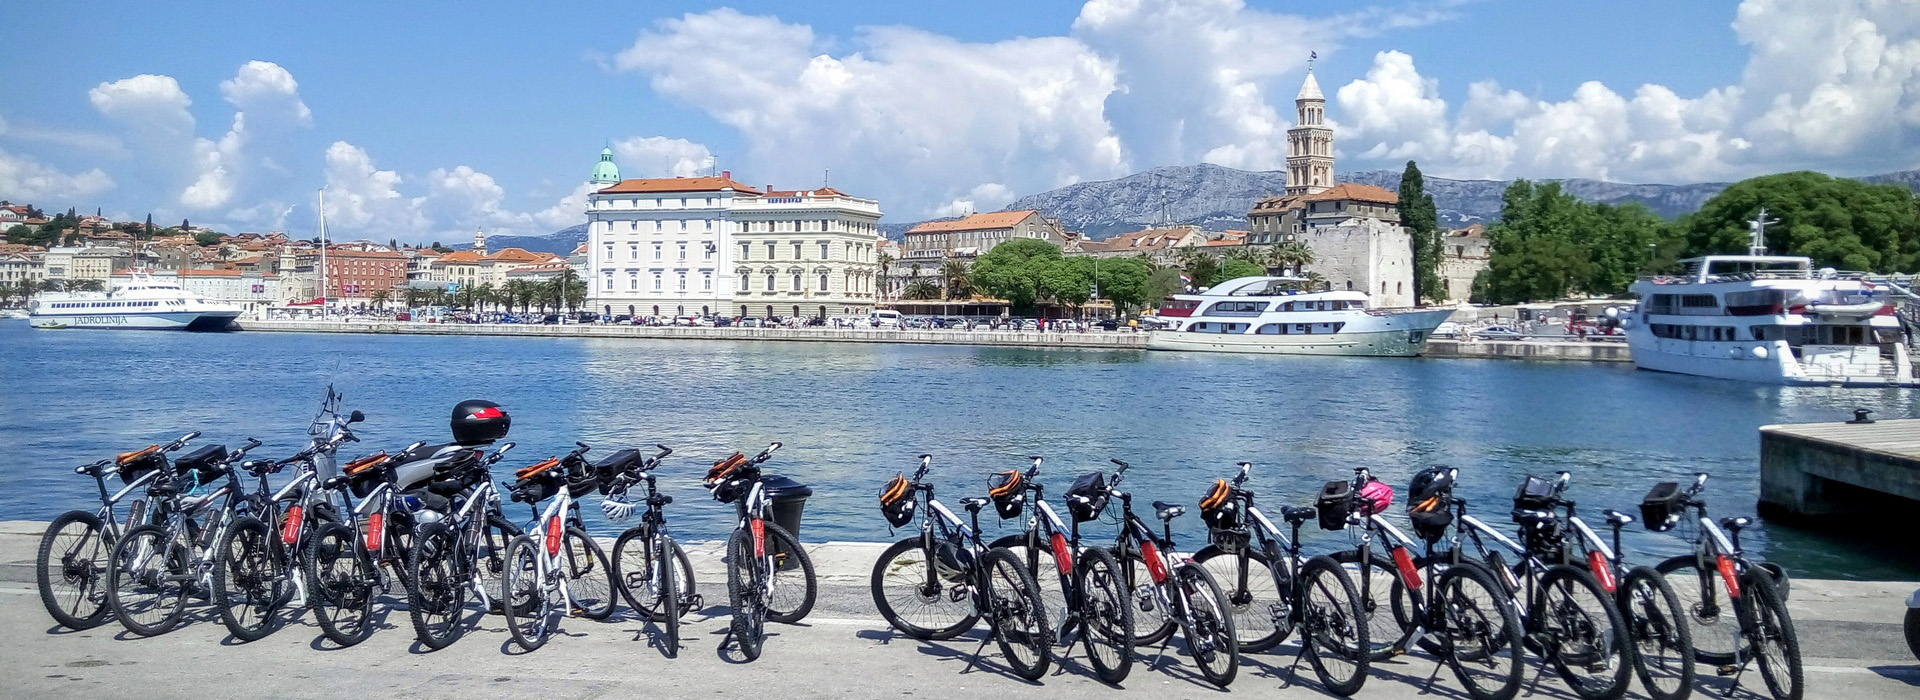 Cycling on the Dalmatian Coast guided holiday - Split waterfront